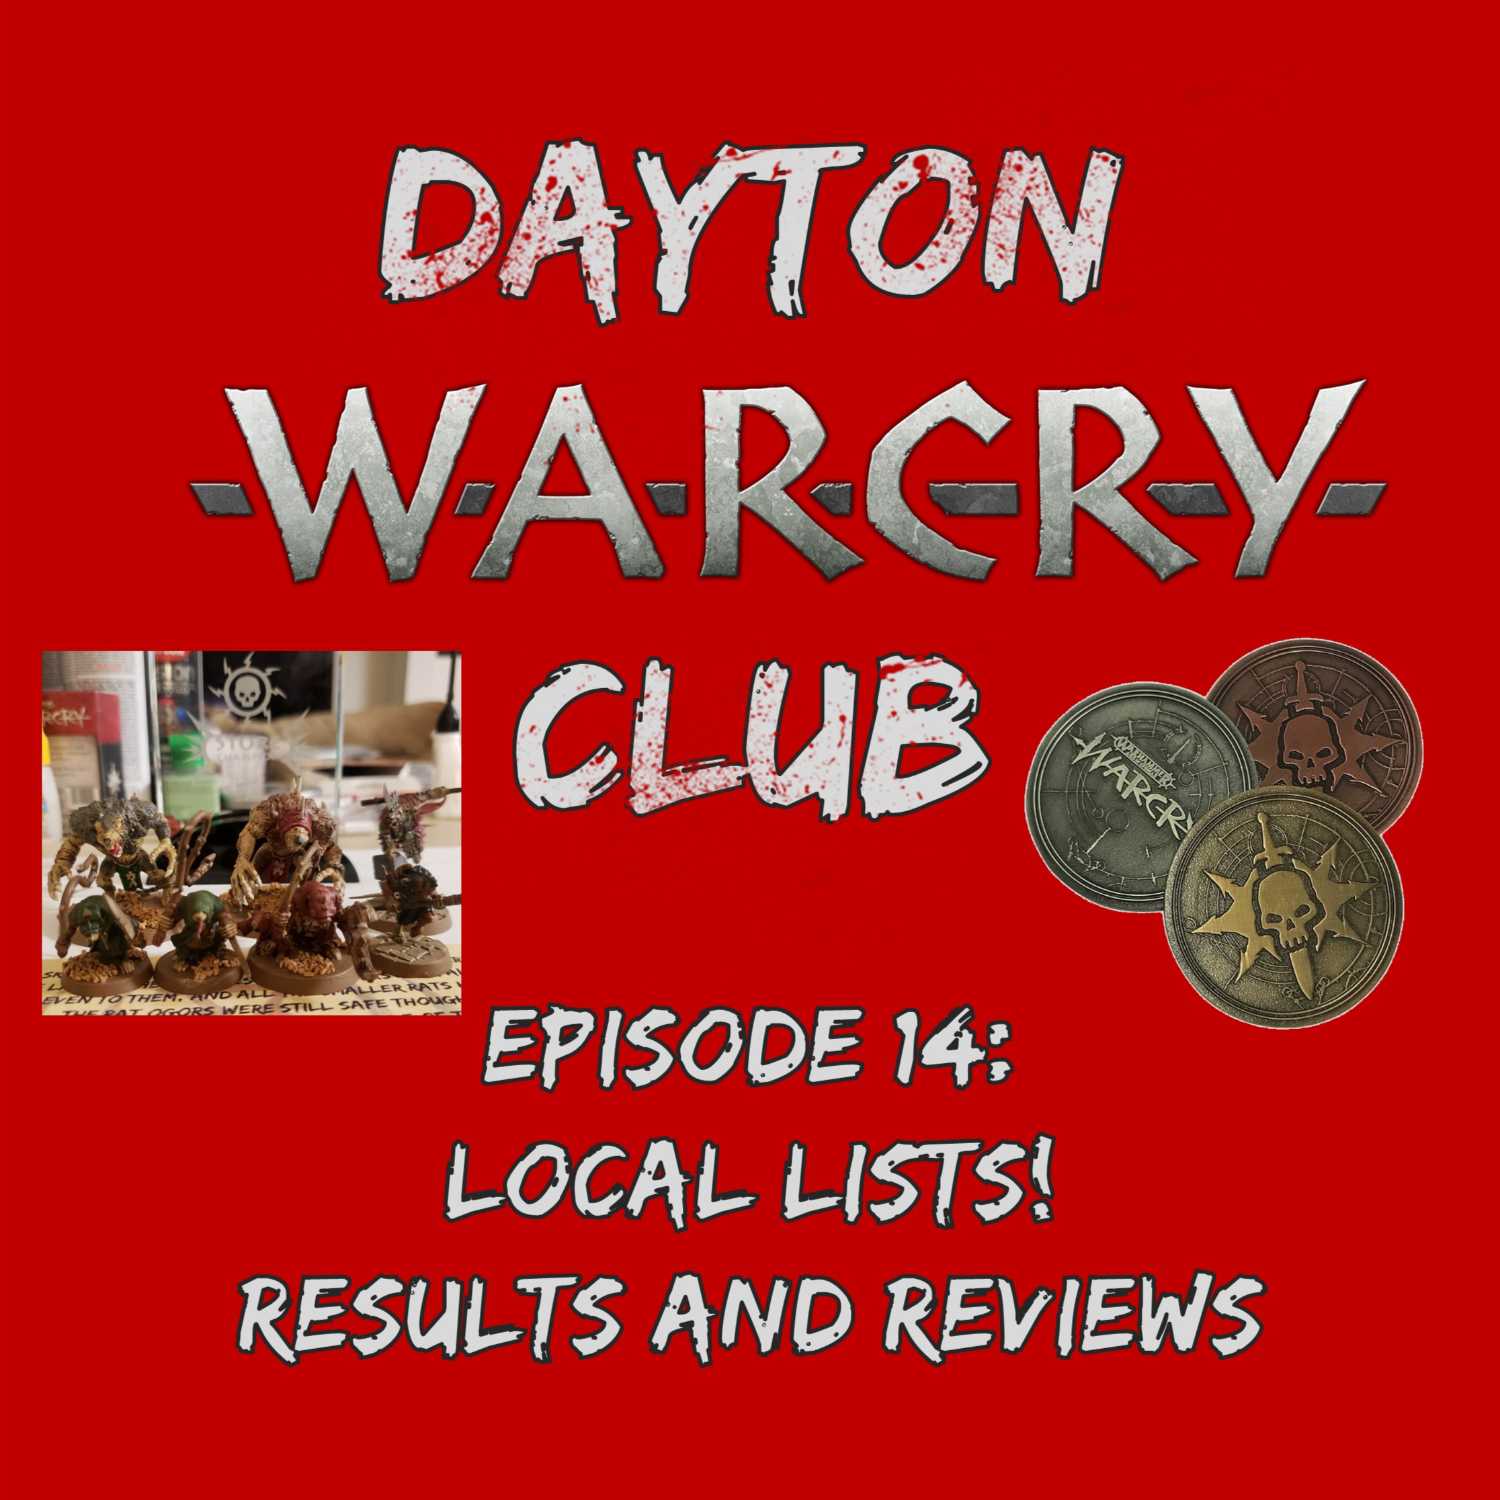 Dayton Warcry Club Episode 14: Local Lists - Results and Reviews